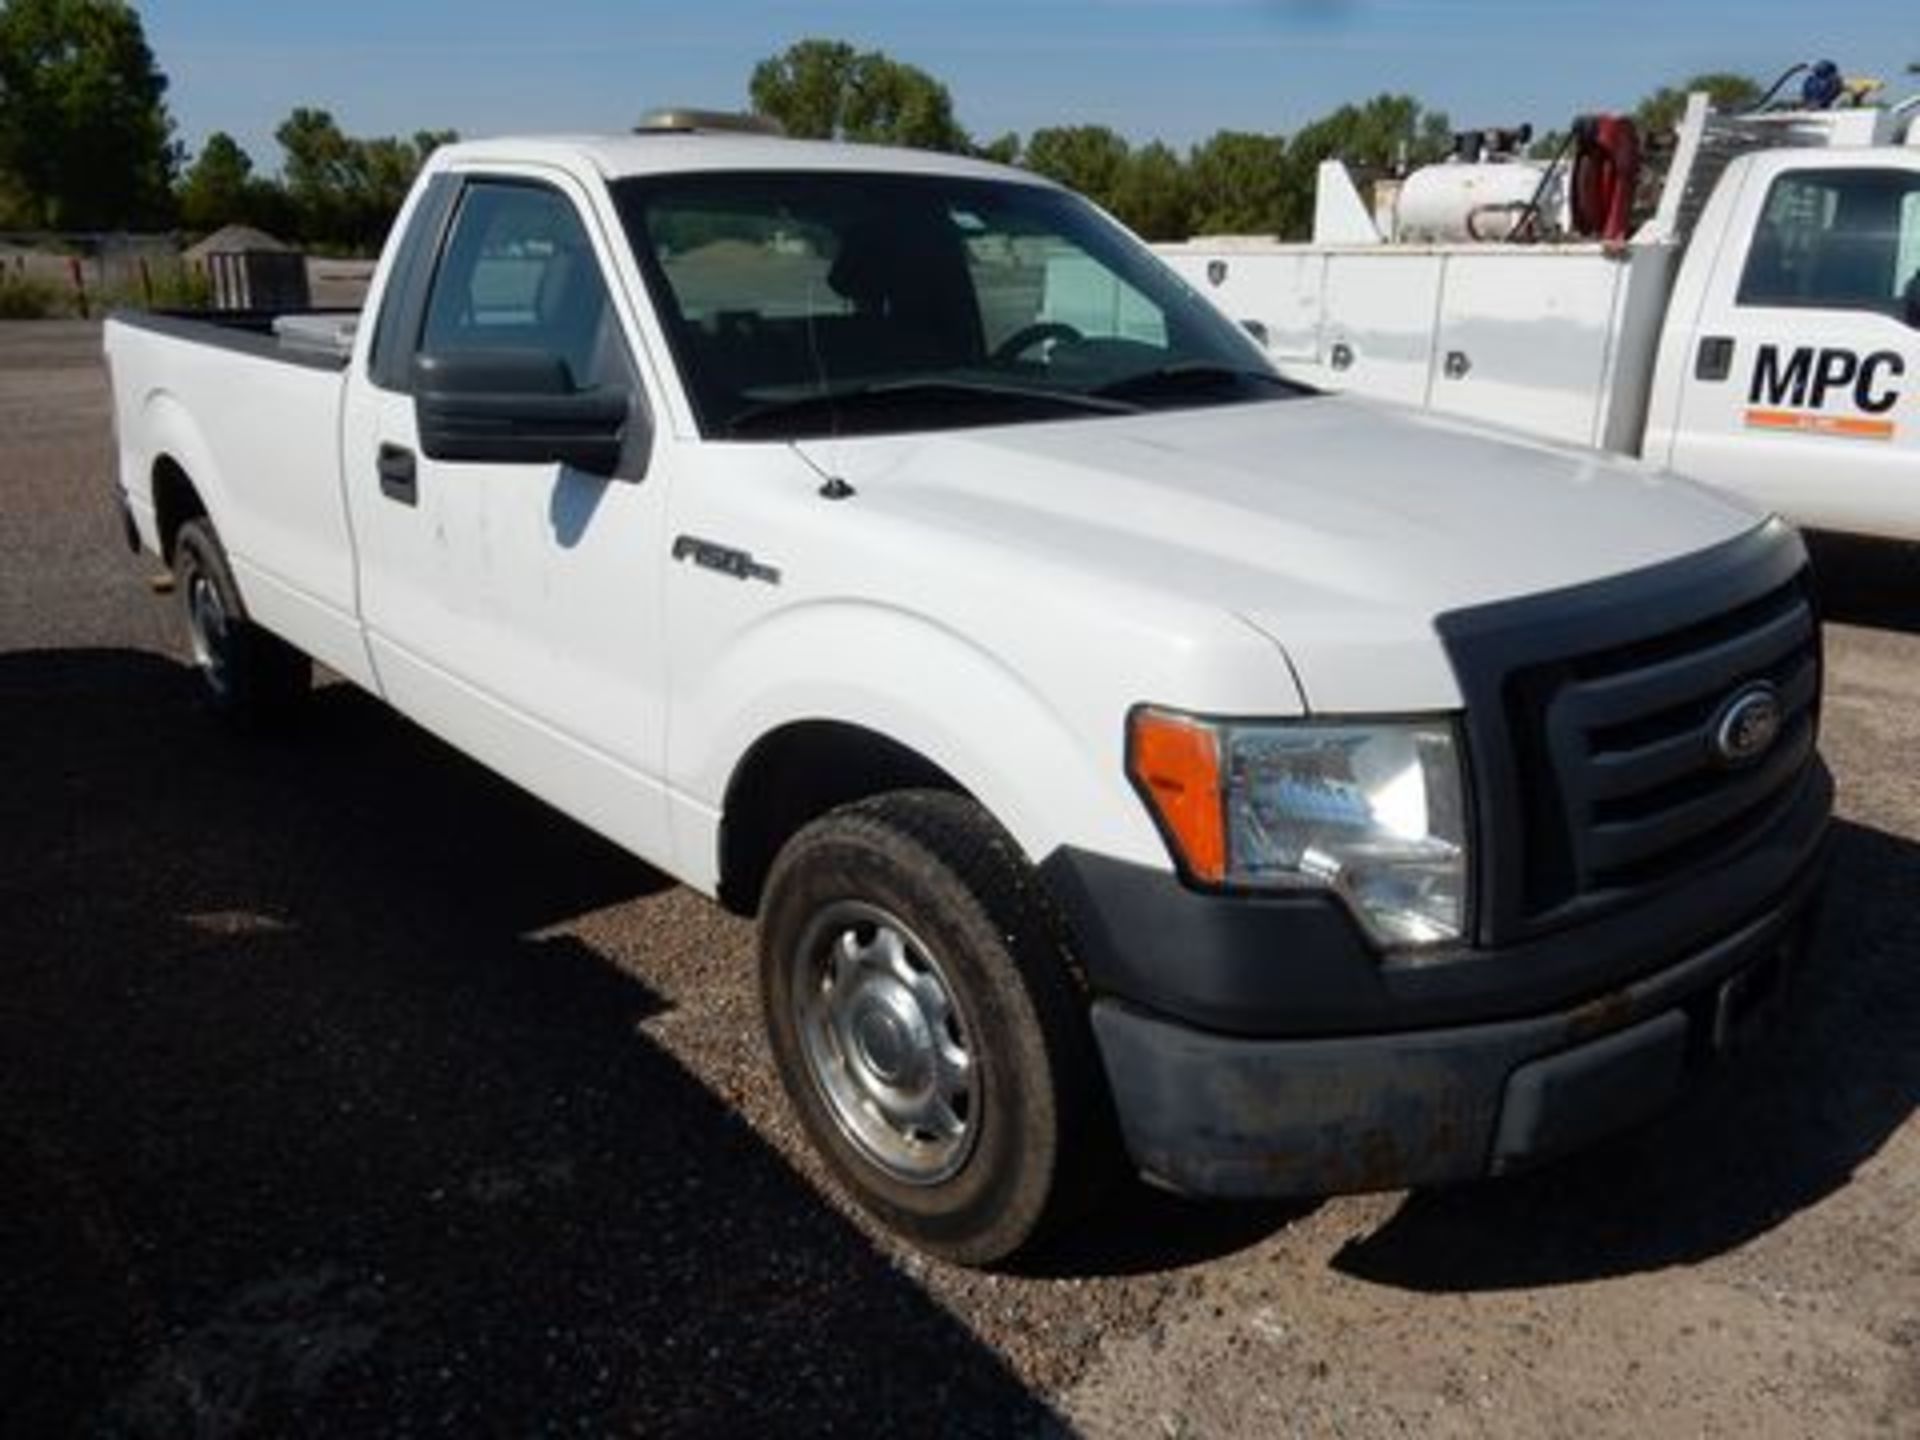 2010 FORD PICKUP, M# F150XL, VIN# 1FTMF1CW4AKC36324, MILEAGE N/A, 2-WHEEL DRIVE, GAS, LONG BED - Image 5 of 6